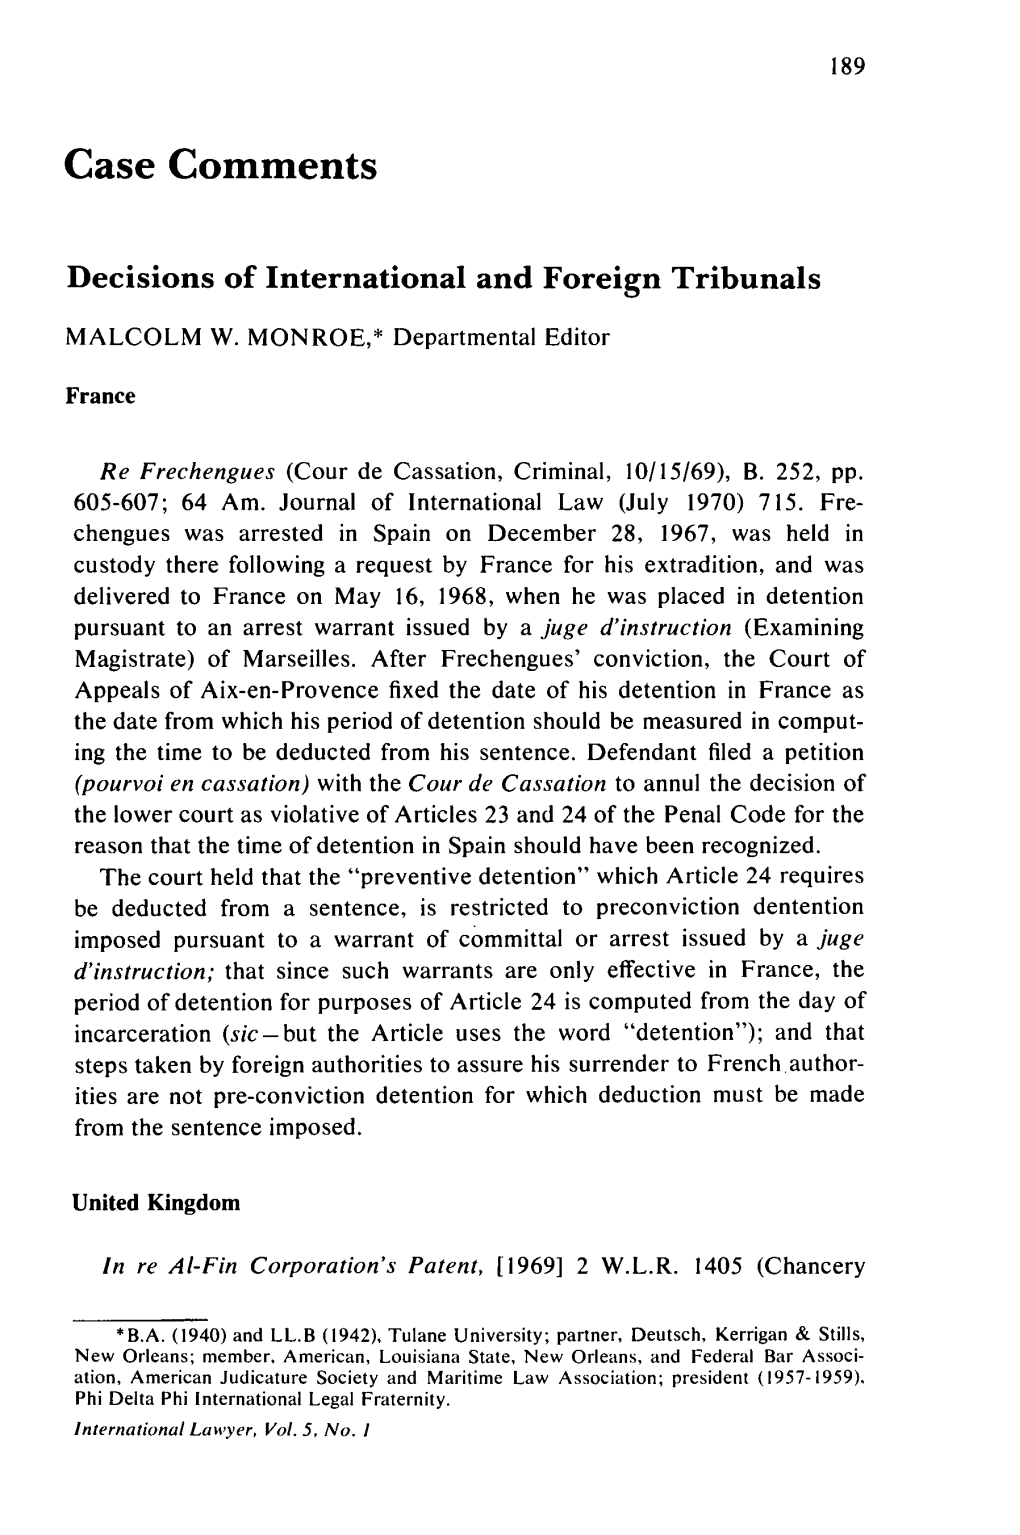 Decisions of International and Foreign Tribunals